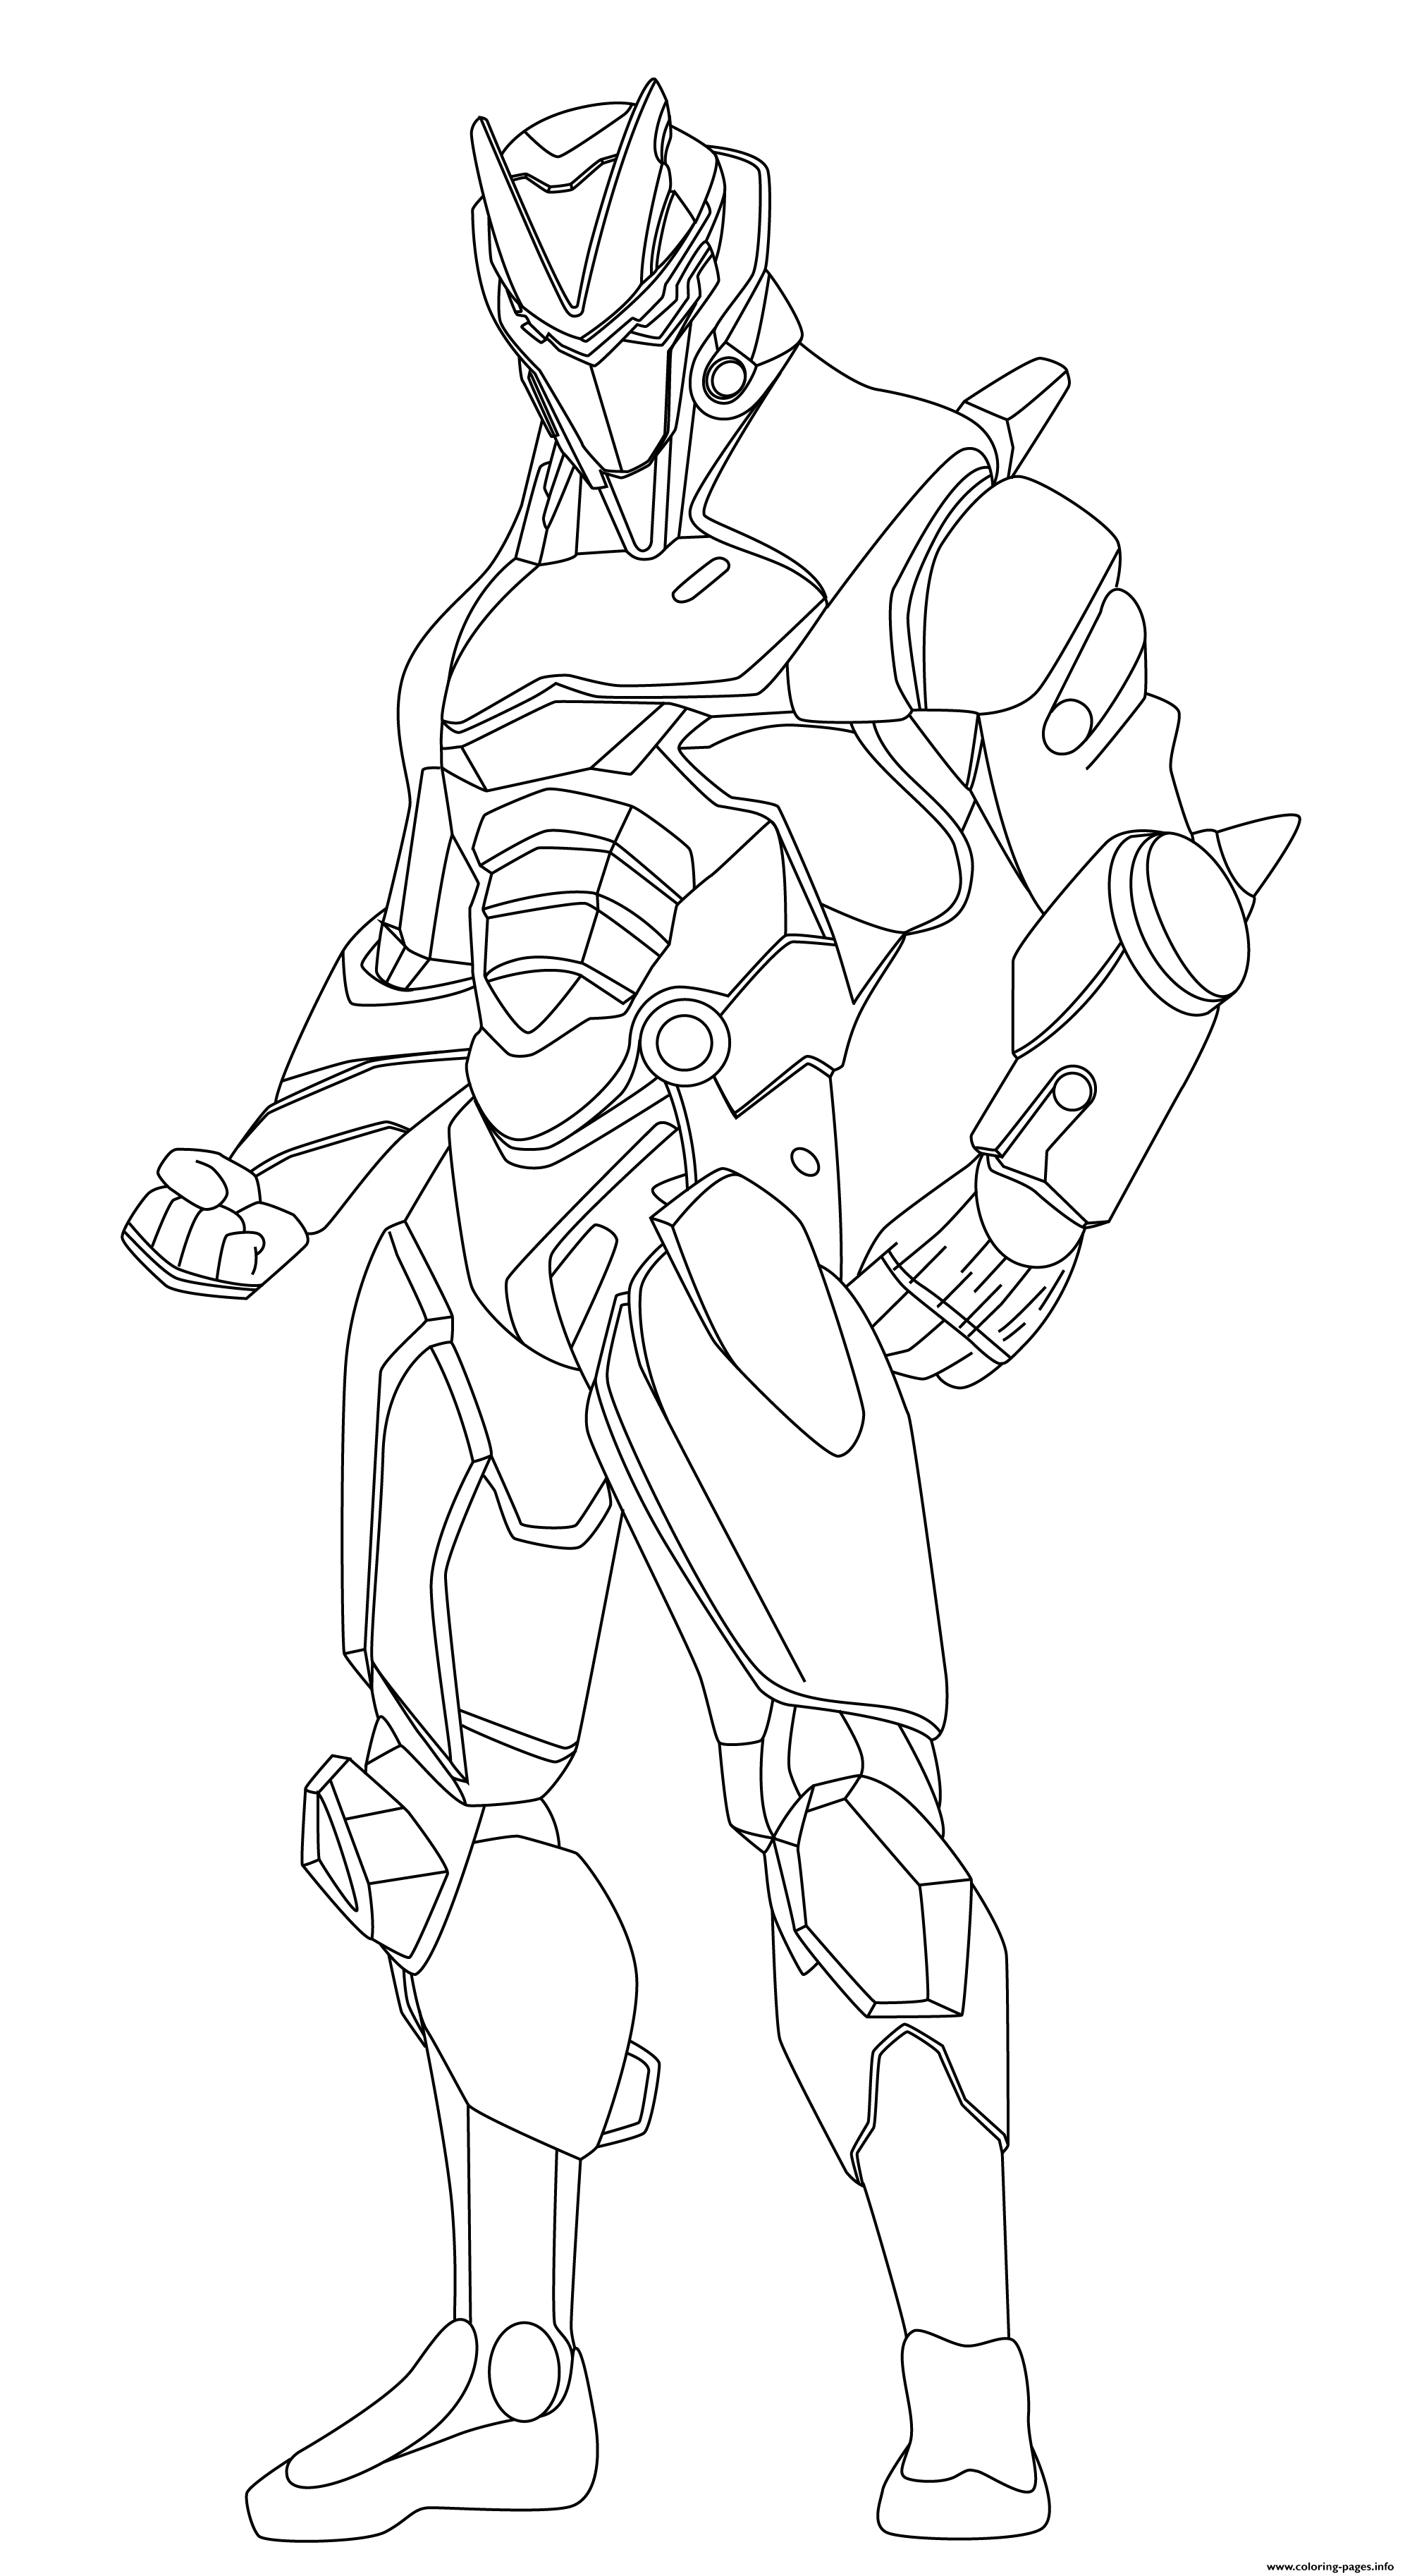 Omega Fortnite Hd Coloring Pages Printable